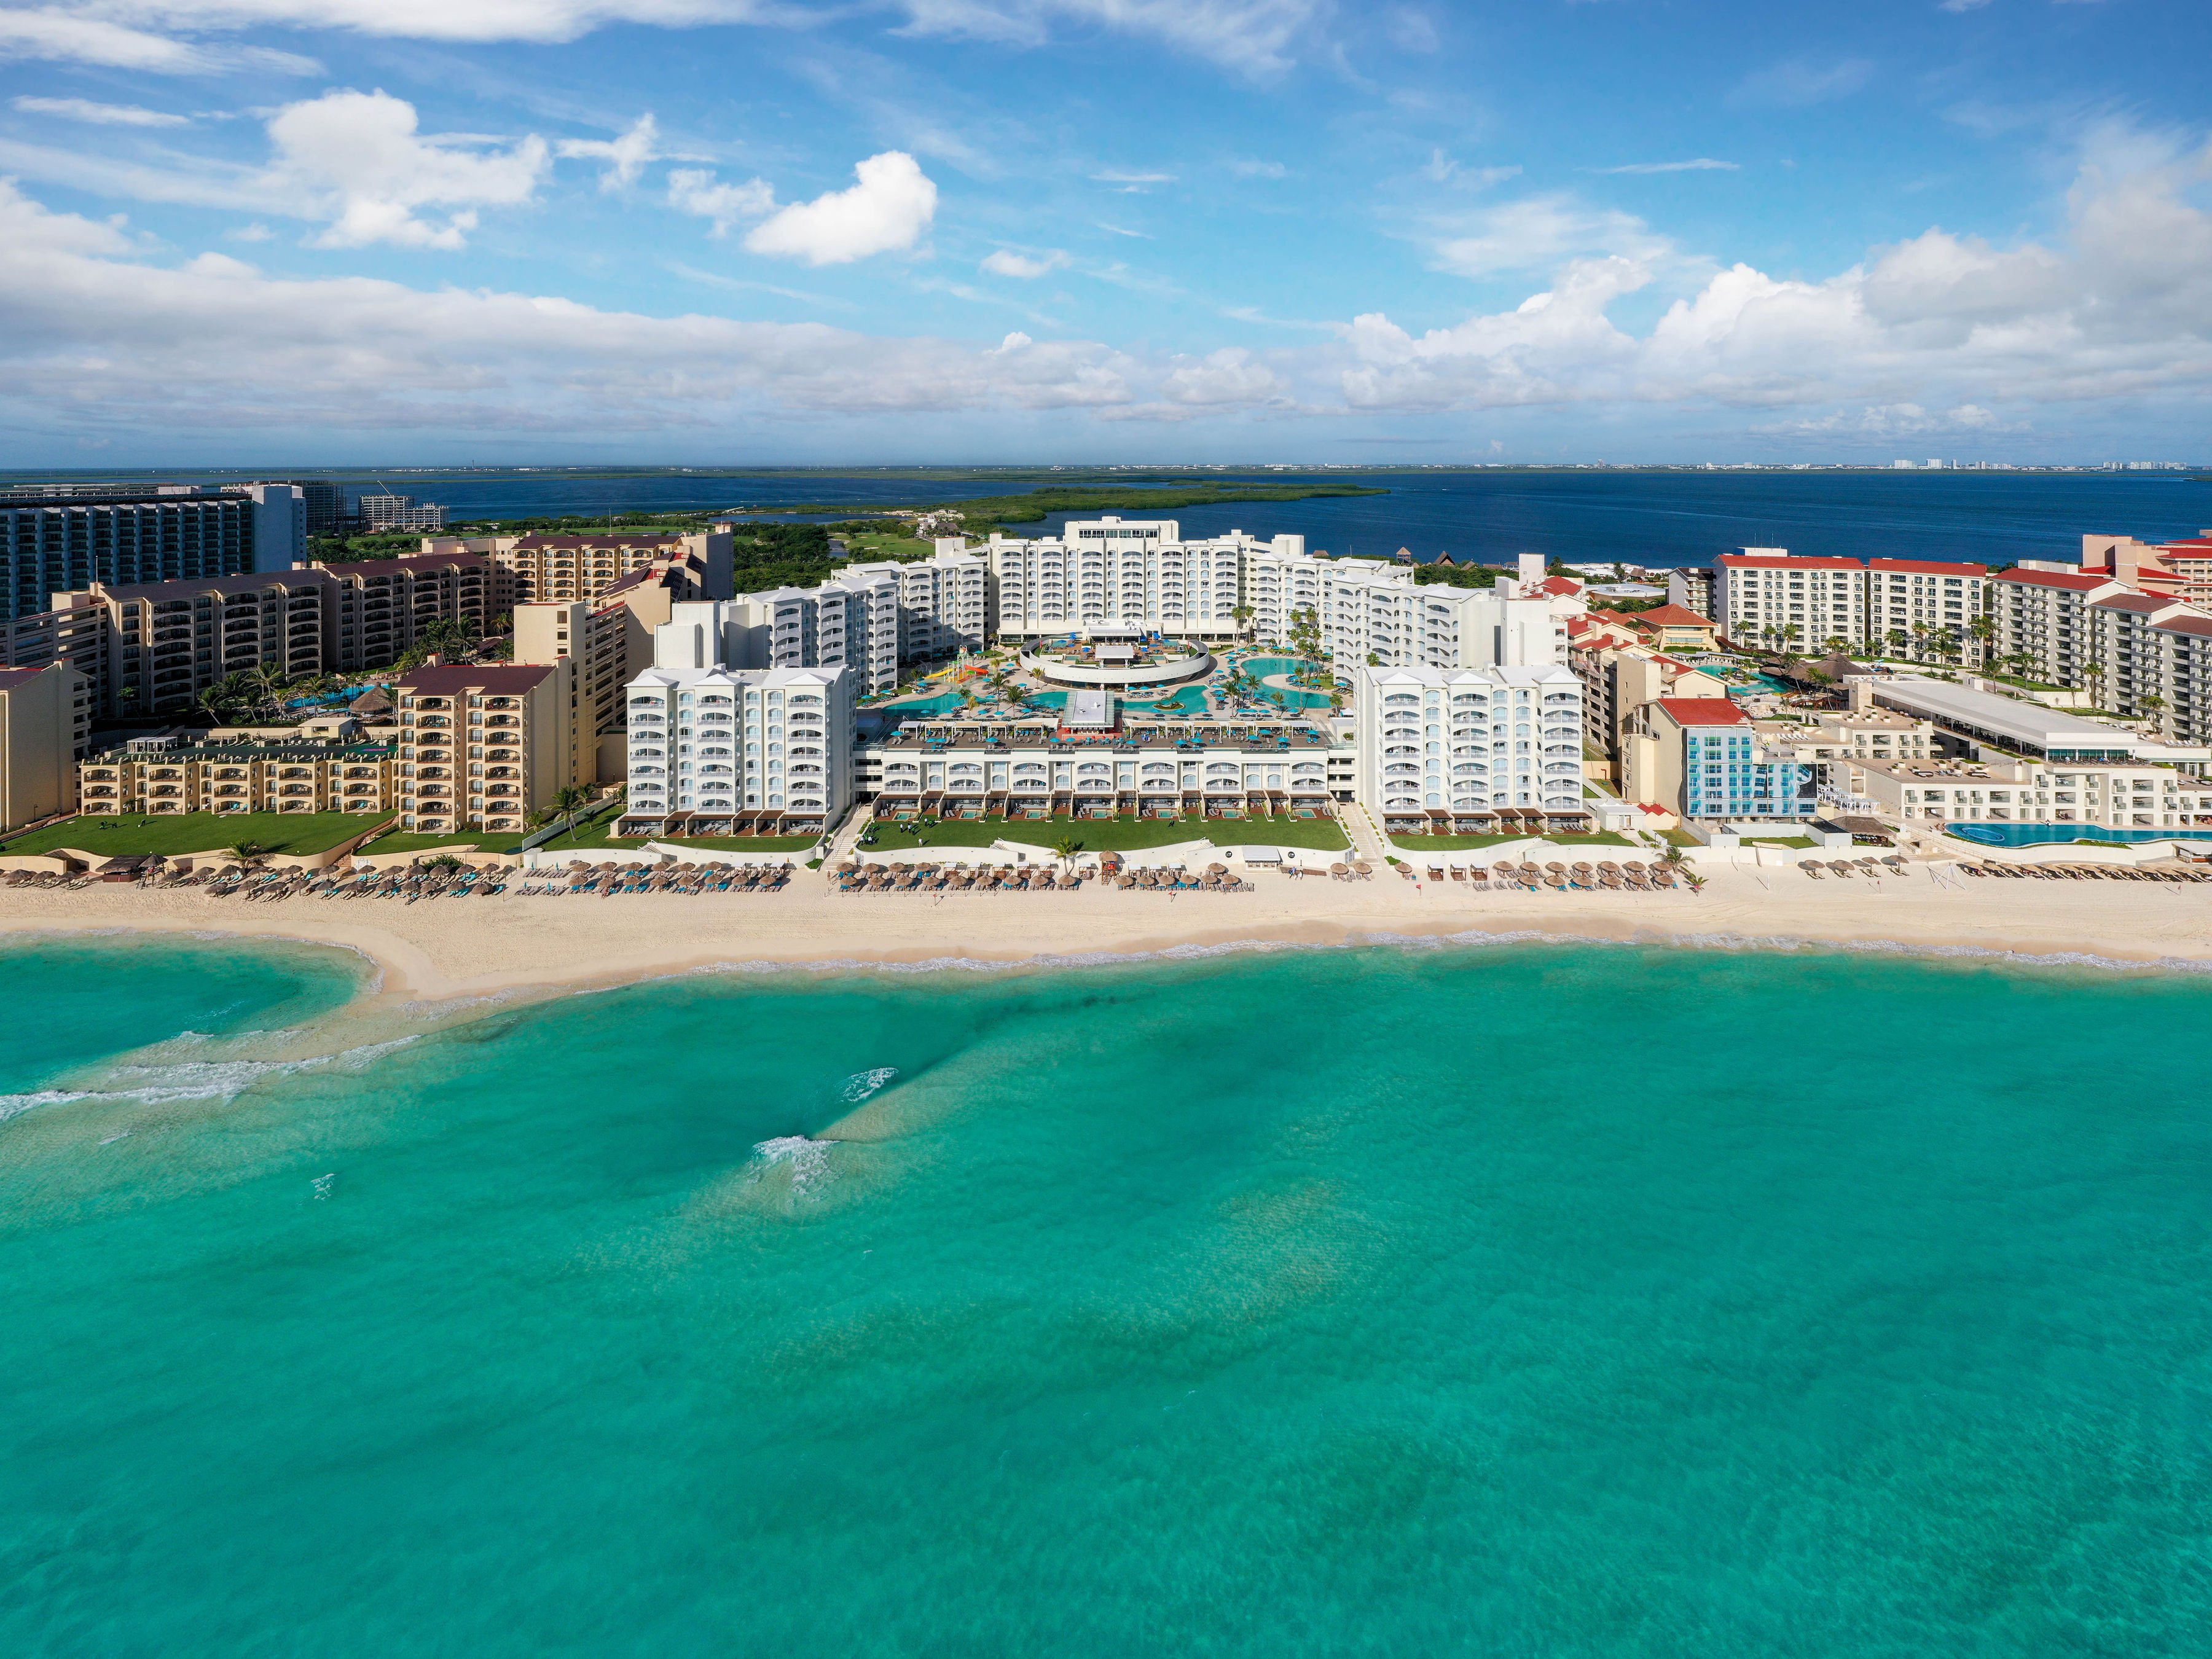 The Hilton Cancun Mar Caribe All-Inclusive Resort is the companys 90th hotel in Mexico